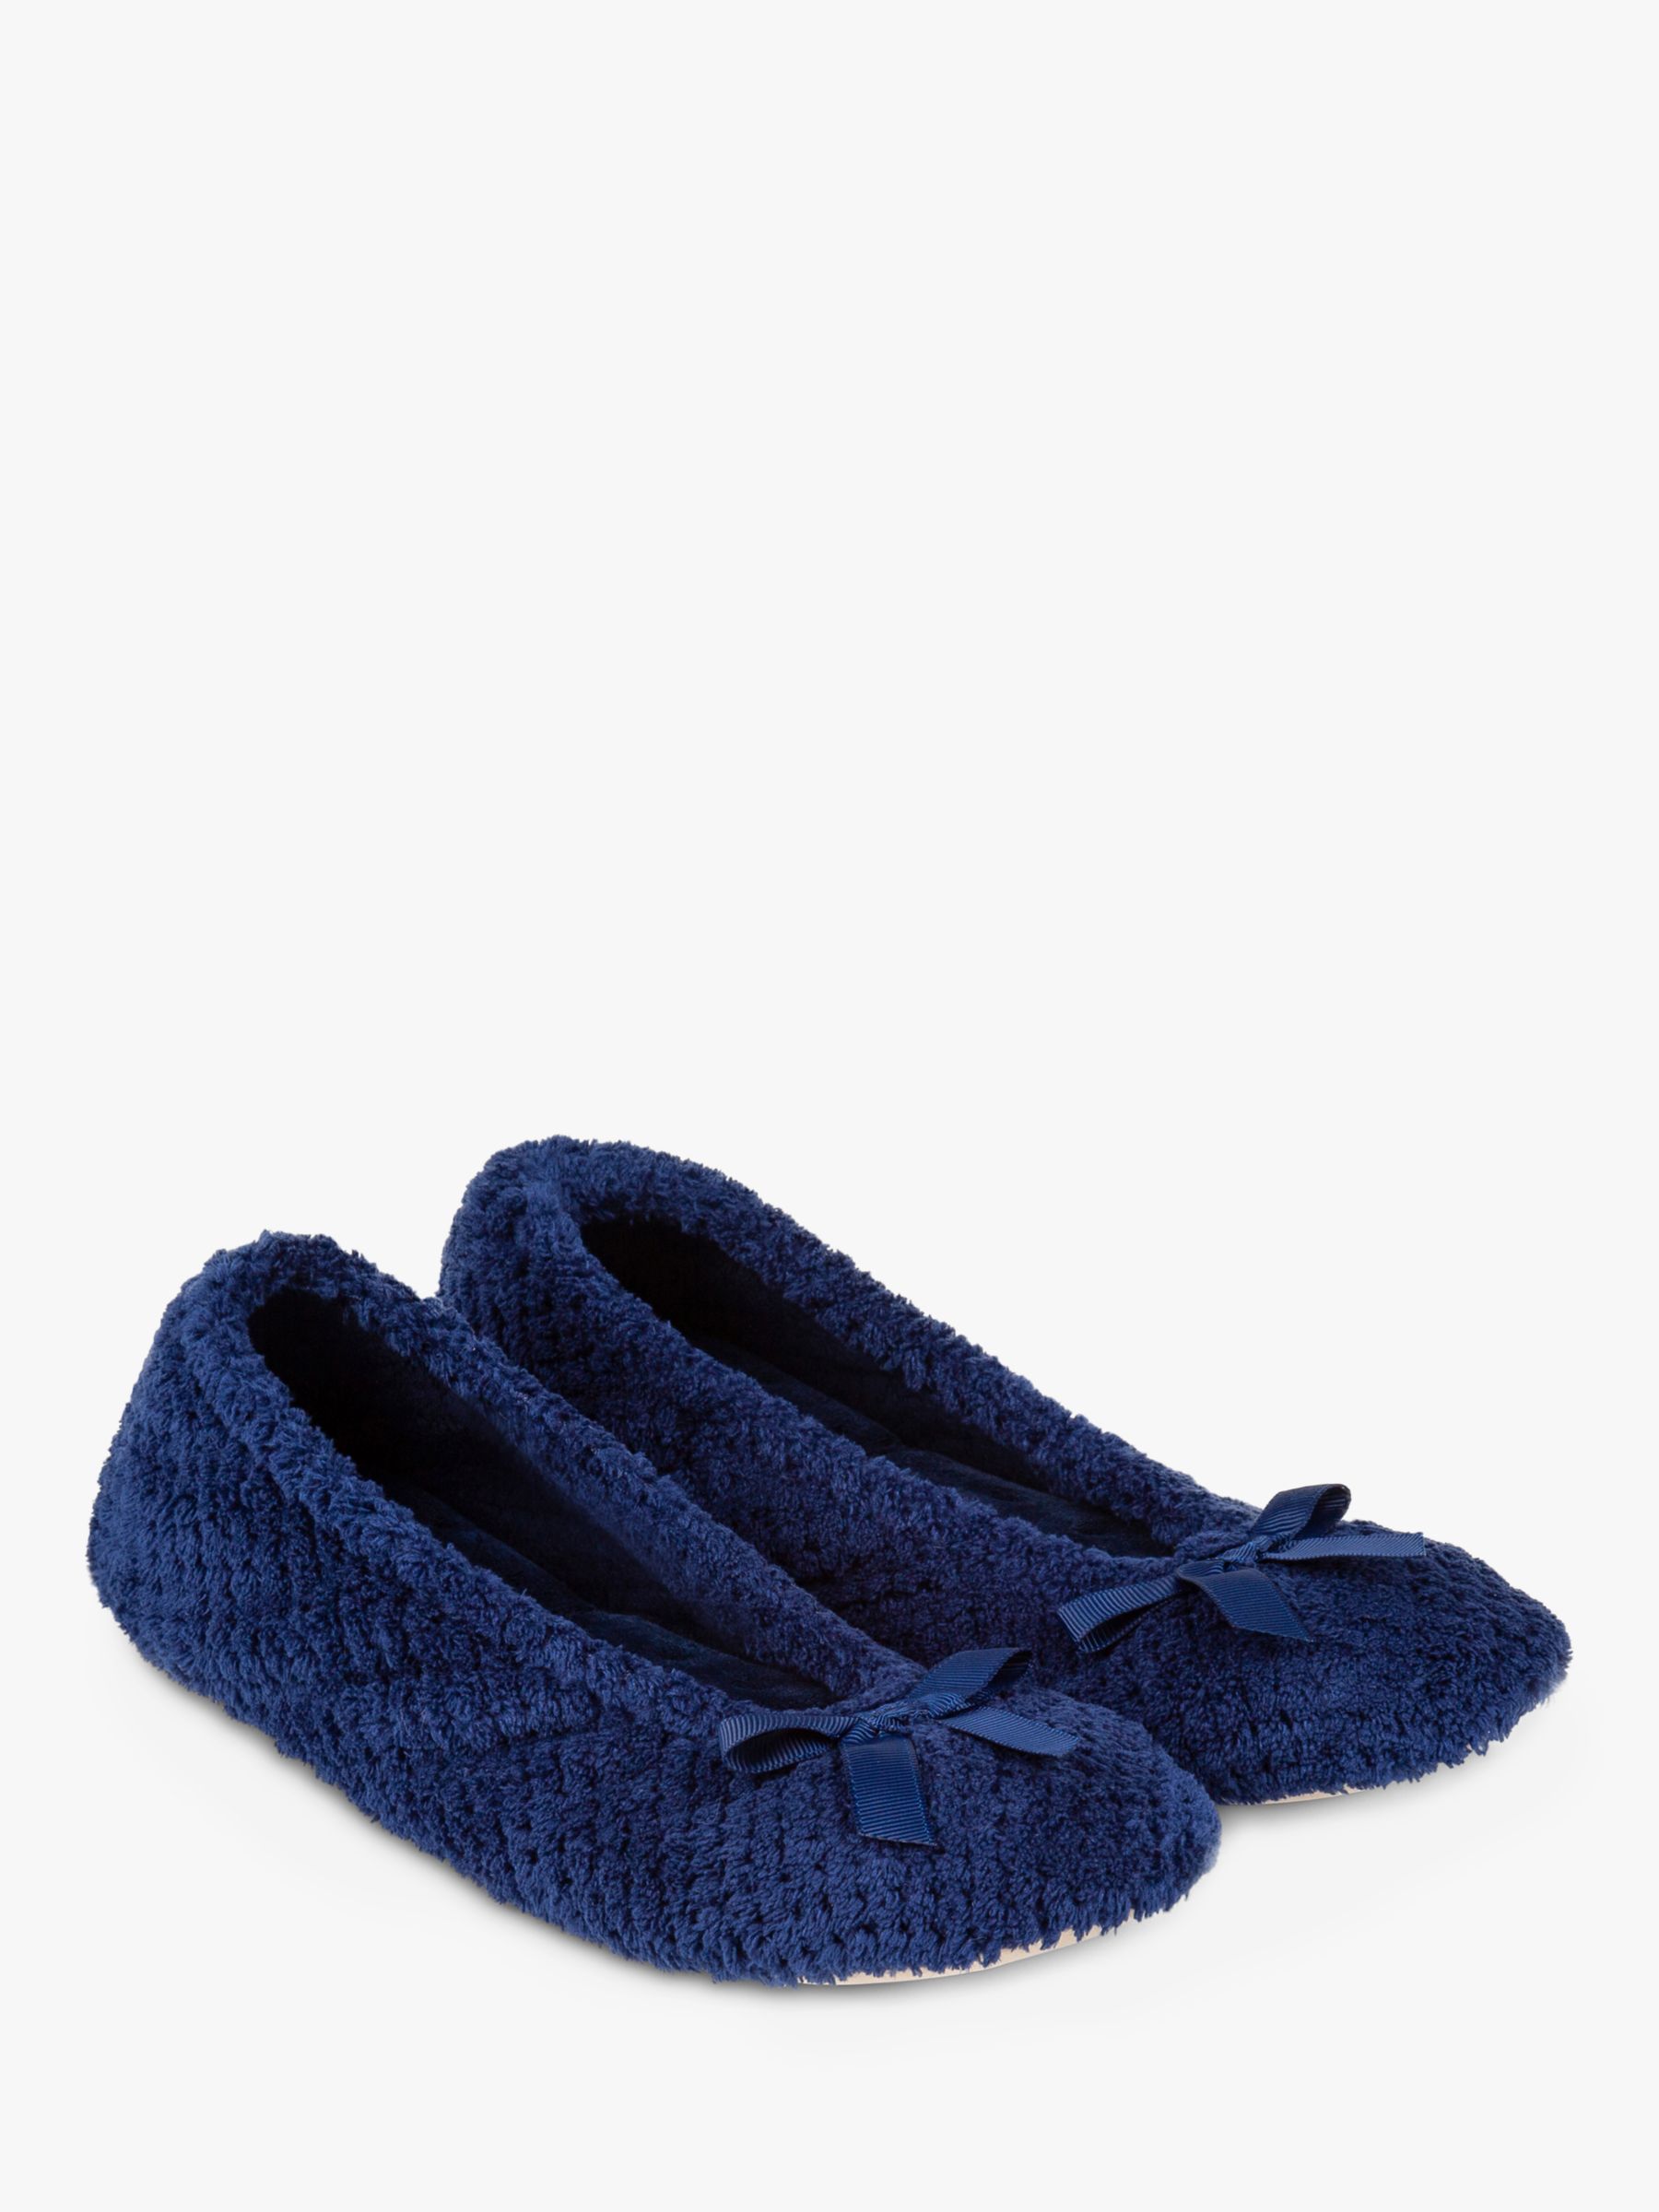 totes Terry Popcorn Ballet Slippers, Navy at John Lewis & Partners